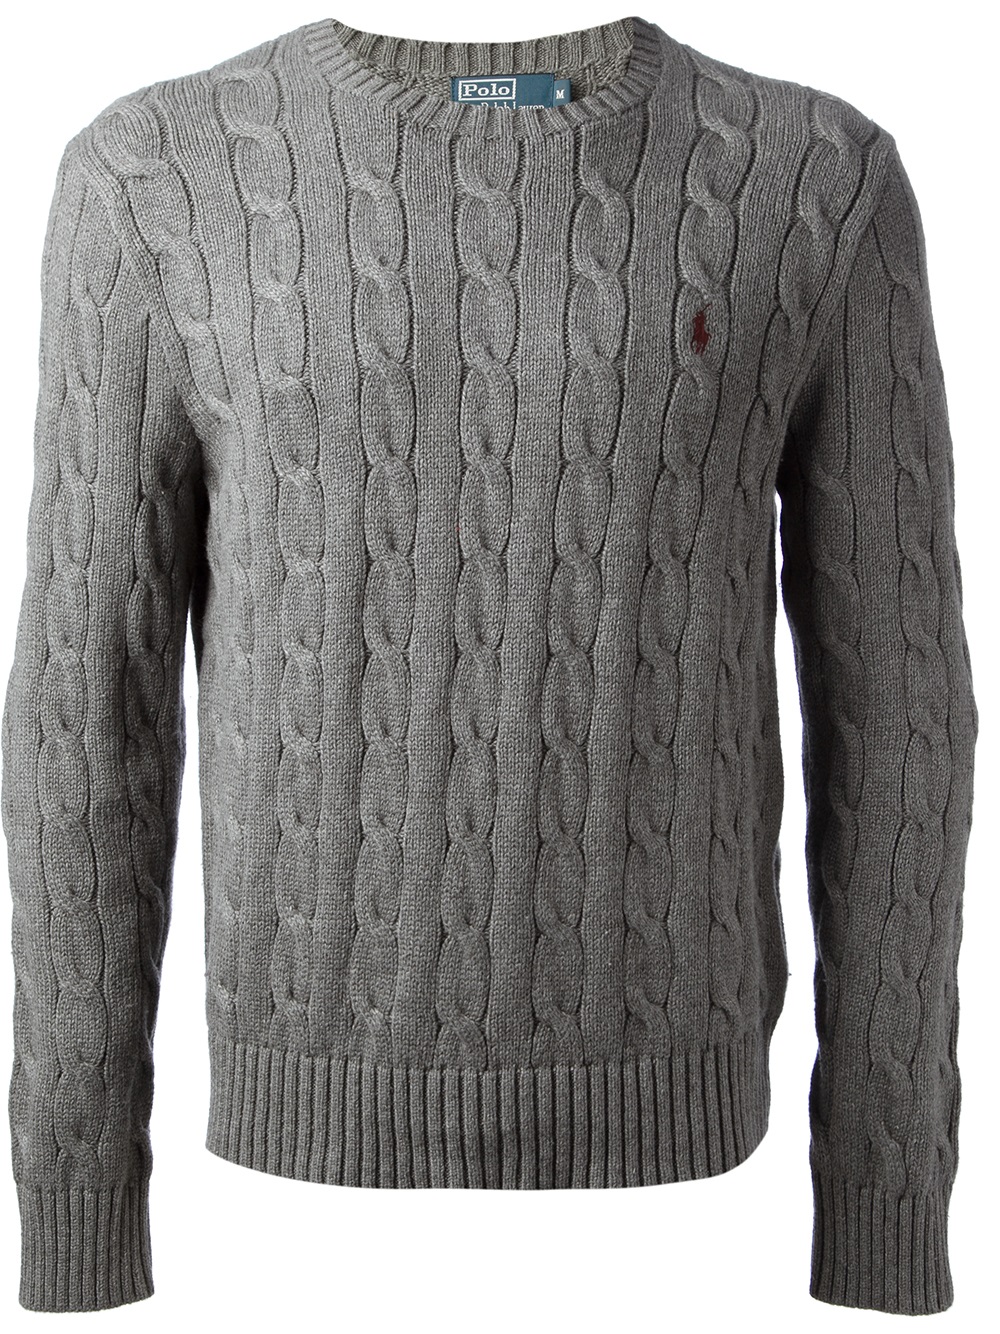 Polo ralph lauren Cable Knit Sweater in Gray for Men | Lyst